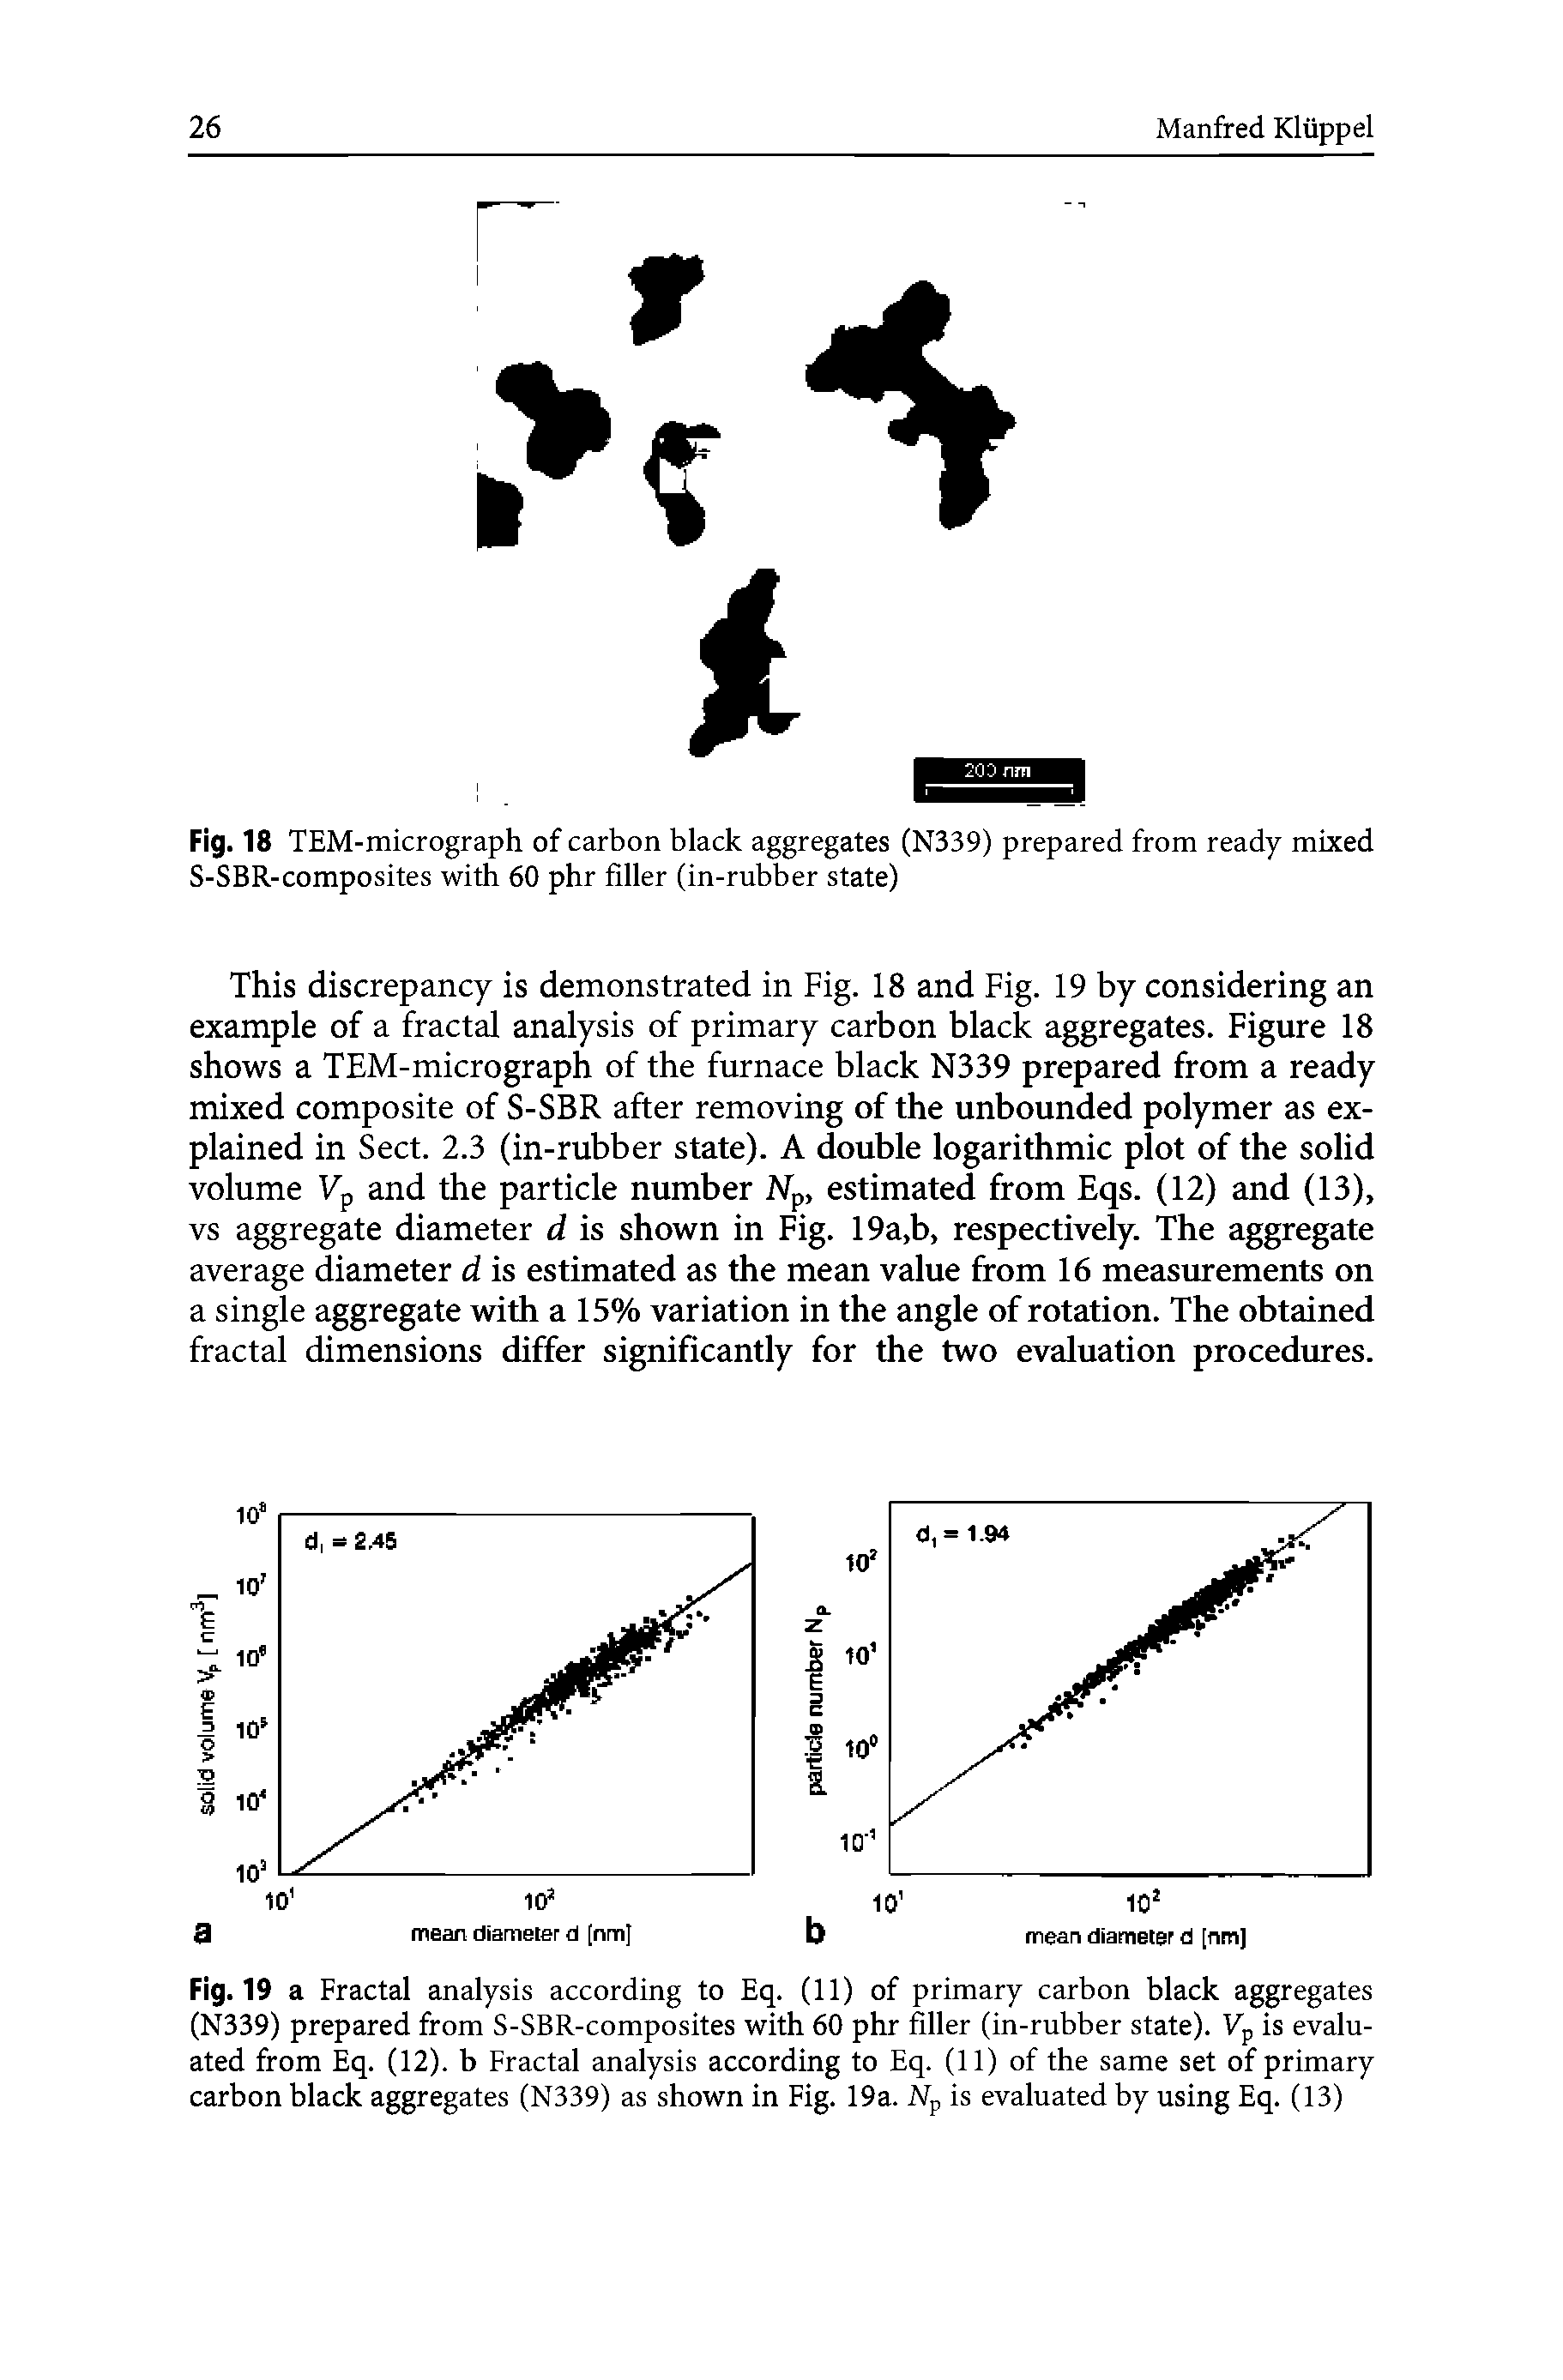 Fig. 19 a Fractal analysis according to Eq. (11) of primary carbon black aggregates (N339) prepared from S-SBR-composites with 60 phr filler (in-rubber state). Vp is evaluated from Eq. (12). b Fractal analysis according to Eq. (11) of the same set of primary carbon black aggregates (N339) as shown in Fig. 19a. Np is evaluated by using Eq. (13)...